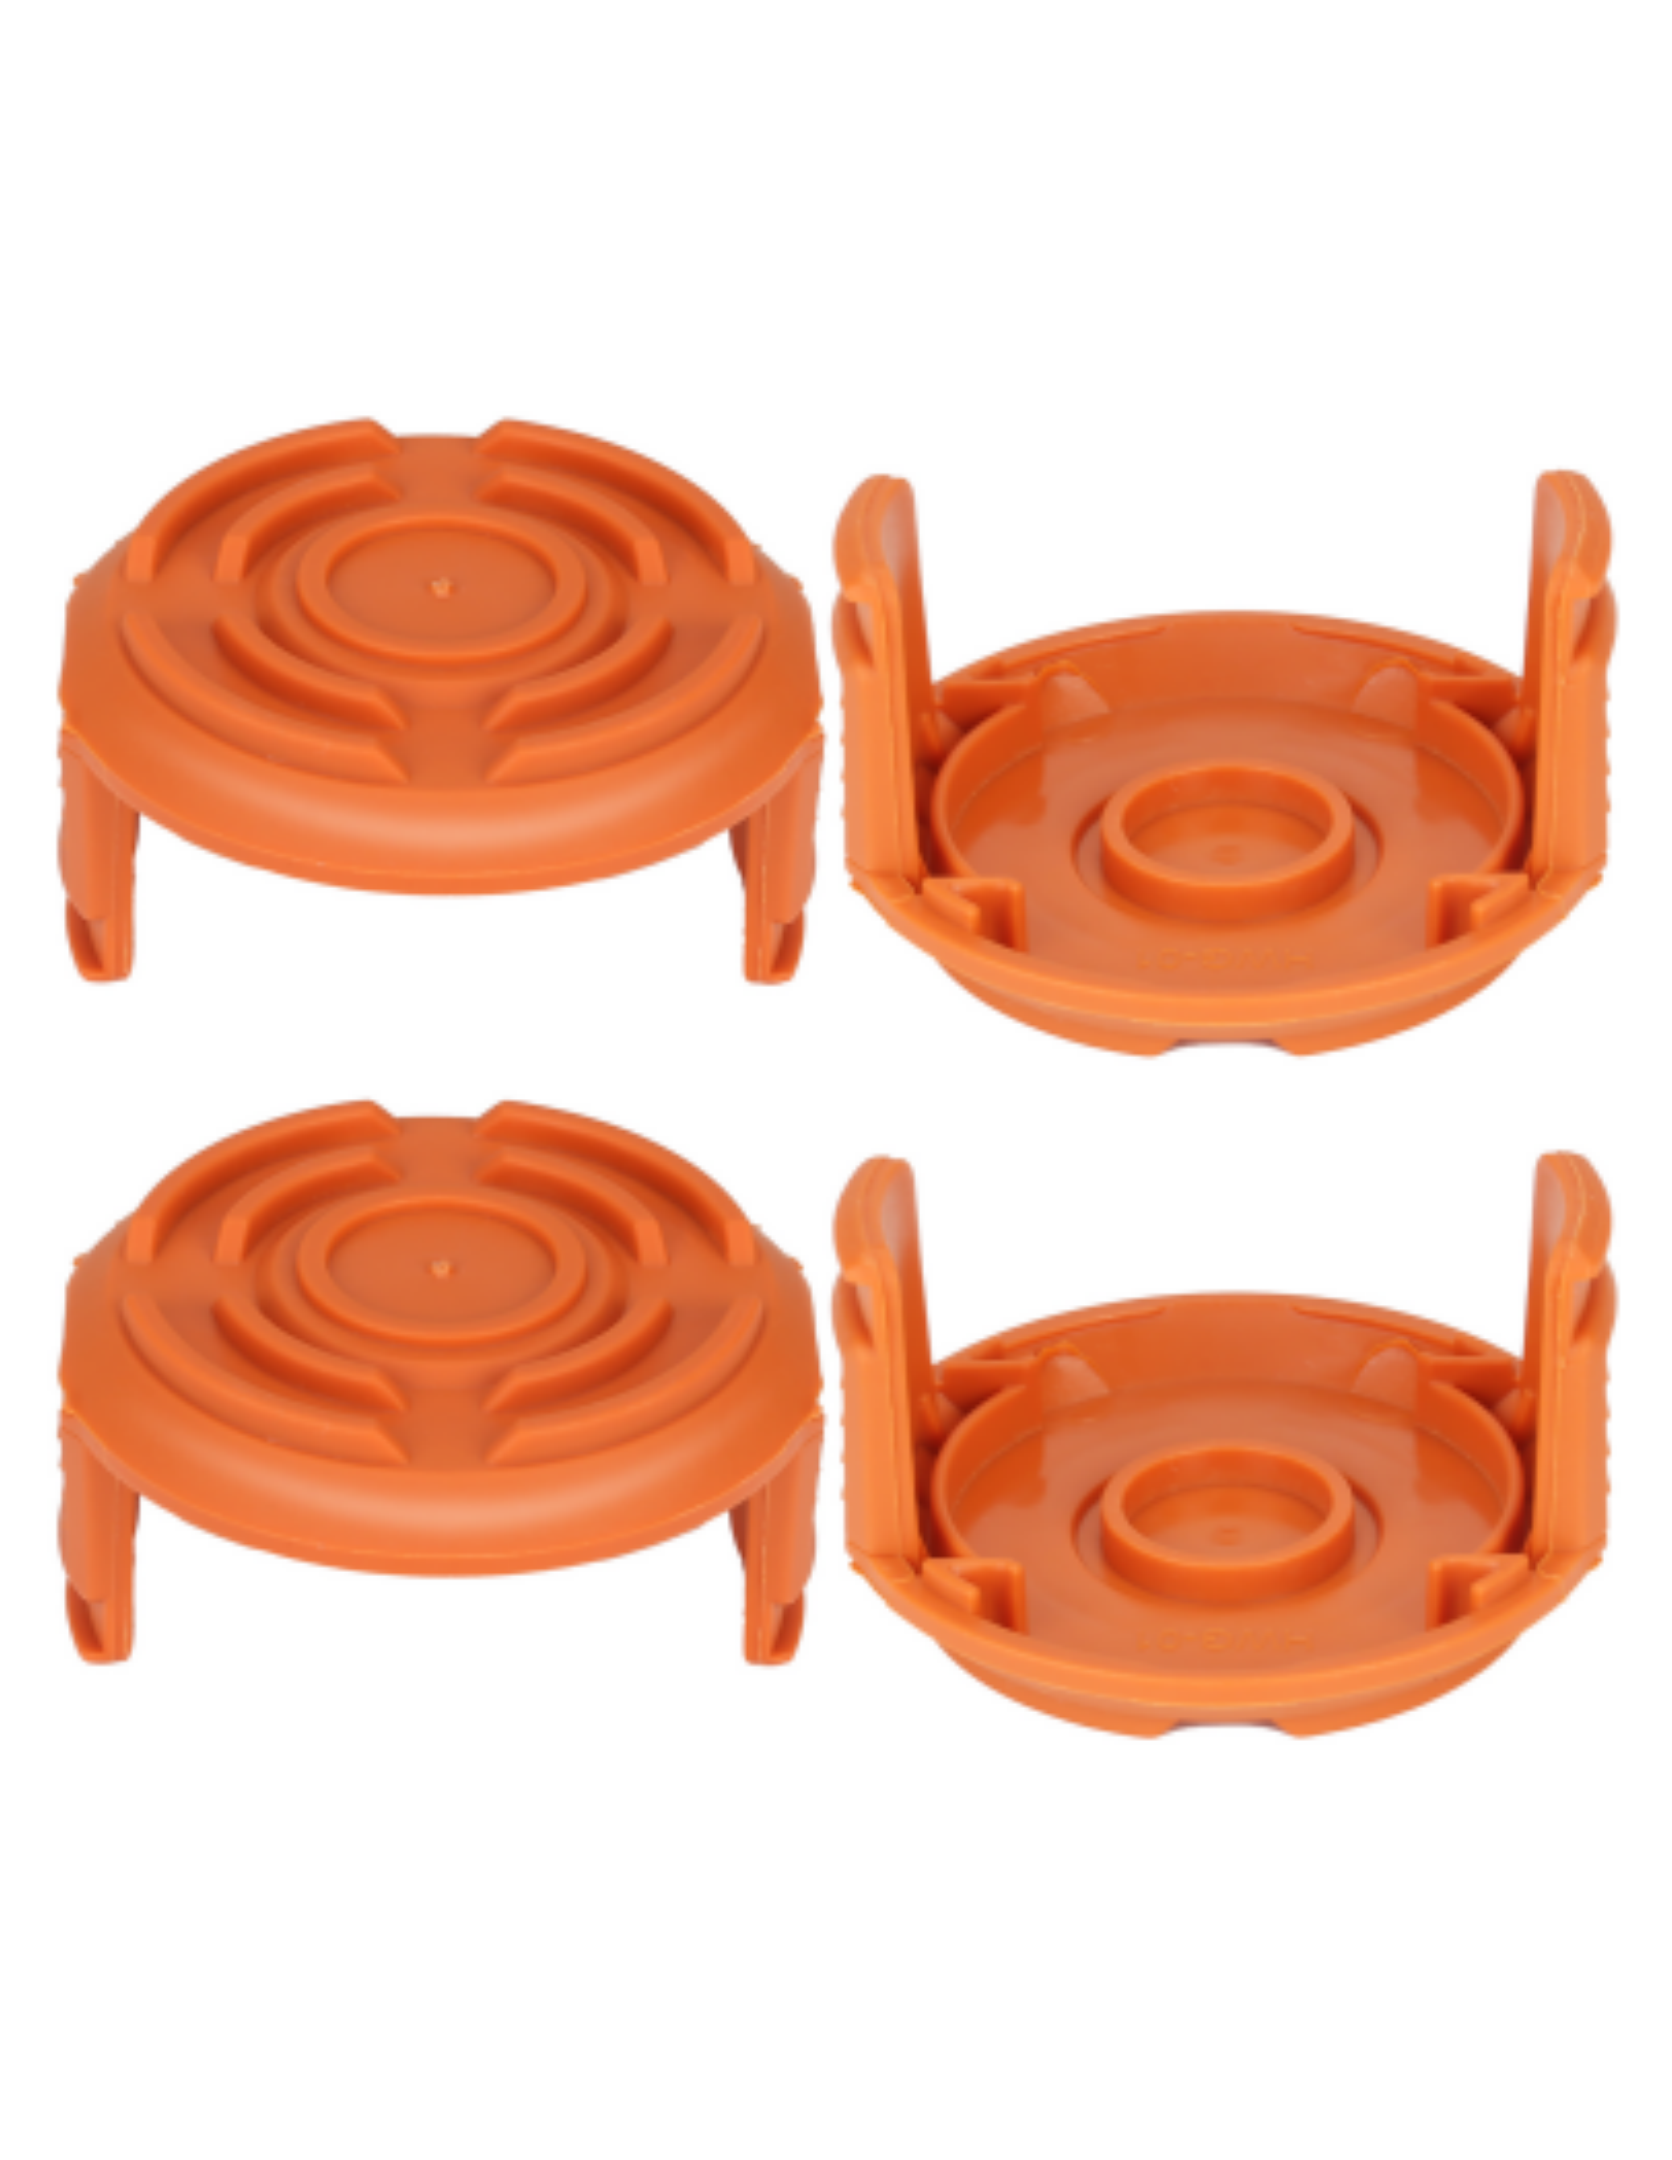 THTEN WA0010 GT Trimmer Replacement Spool Cap Covers,WA6531 Trimmer Cap Compatible with Worx WG155 WG180 String Trimmers,50006531 Trimmer Line Cover,Weed Eater Spool Cap for Worx Parts (4 Pack)